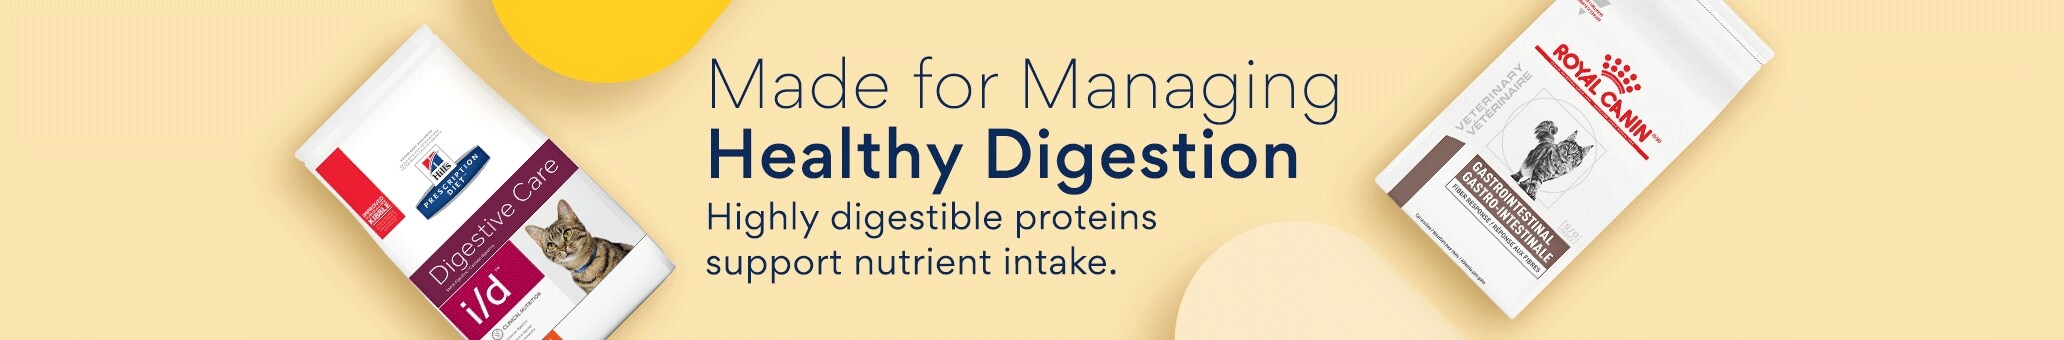 Made for Managing Healthy Digestion. Highly digestible proteins support nutrient intake.